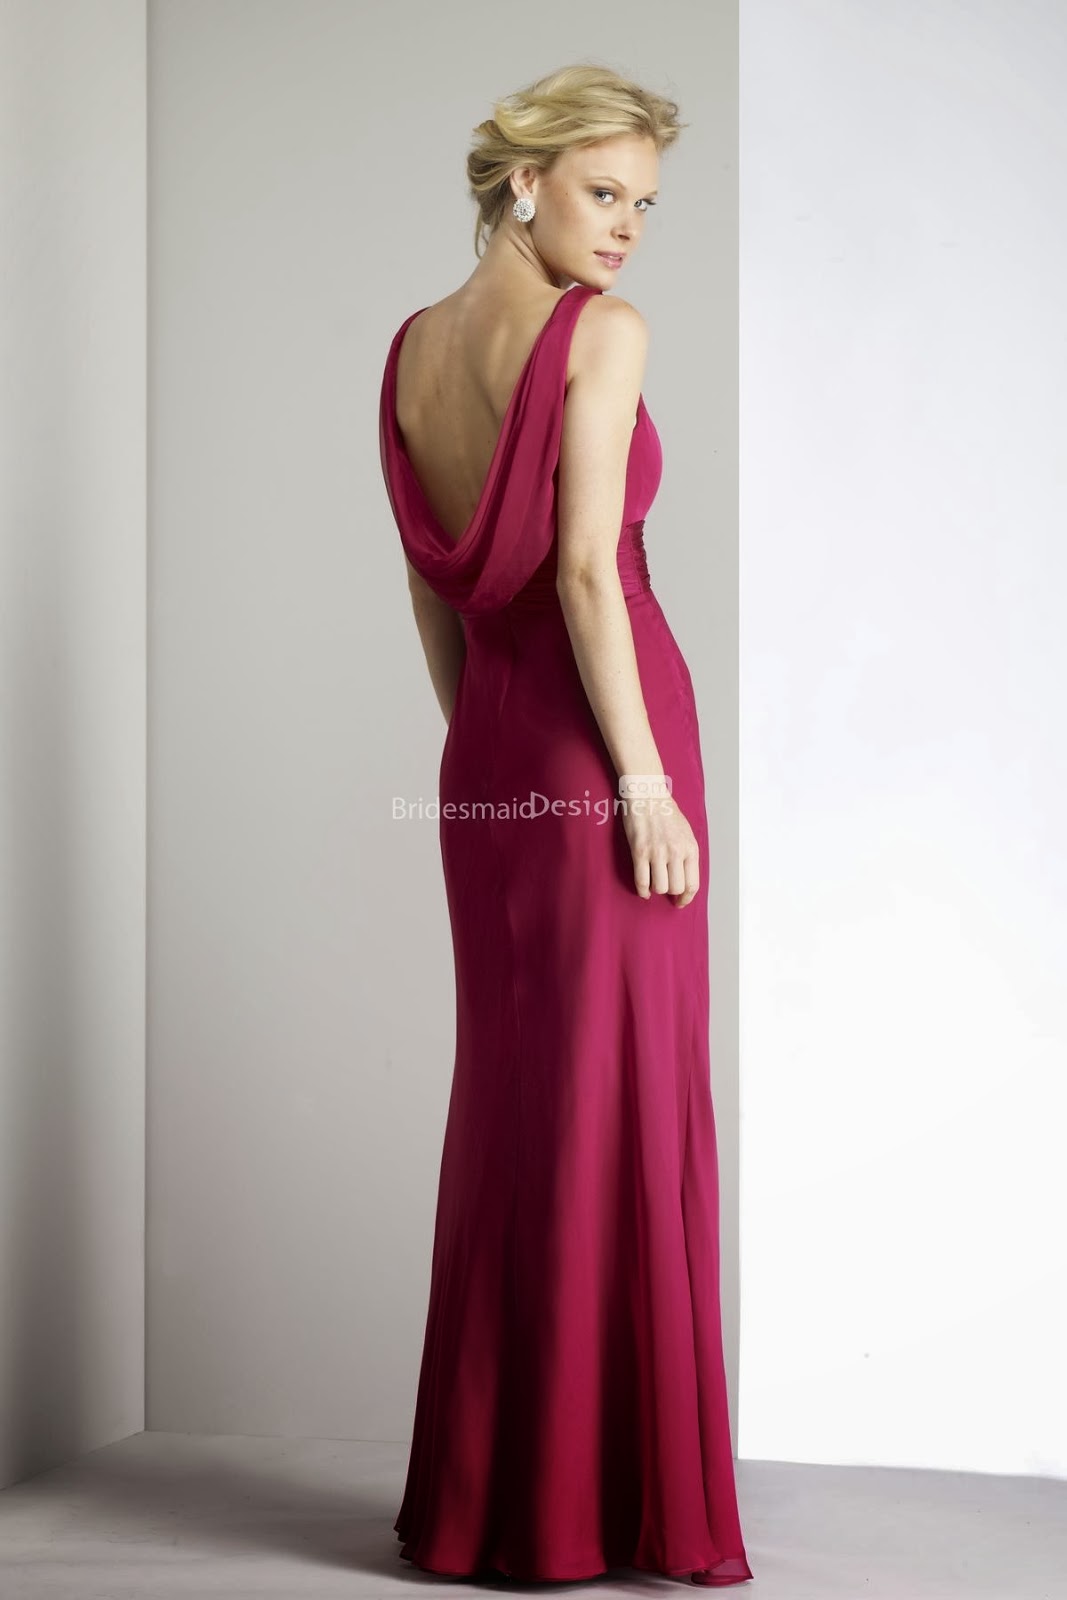 http://www.bridesmaiddesigners.com/best-berry-scoop-neck-sleeveless-empire-a-line-long-bow-chiffon-homecoming-bridesmaid-gown-793.html